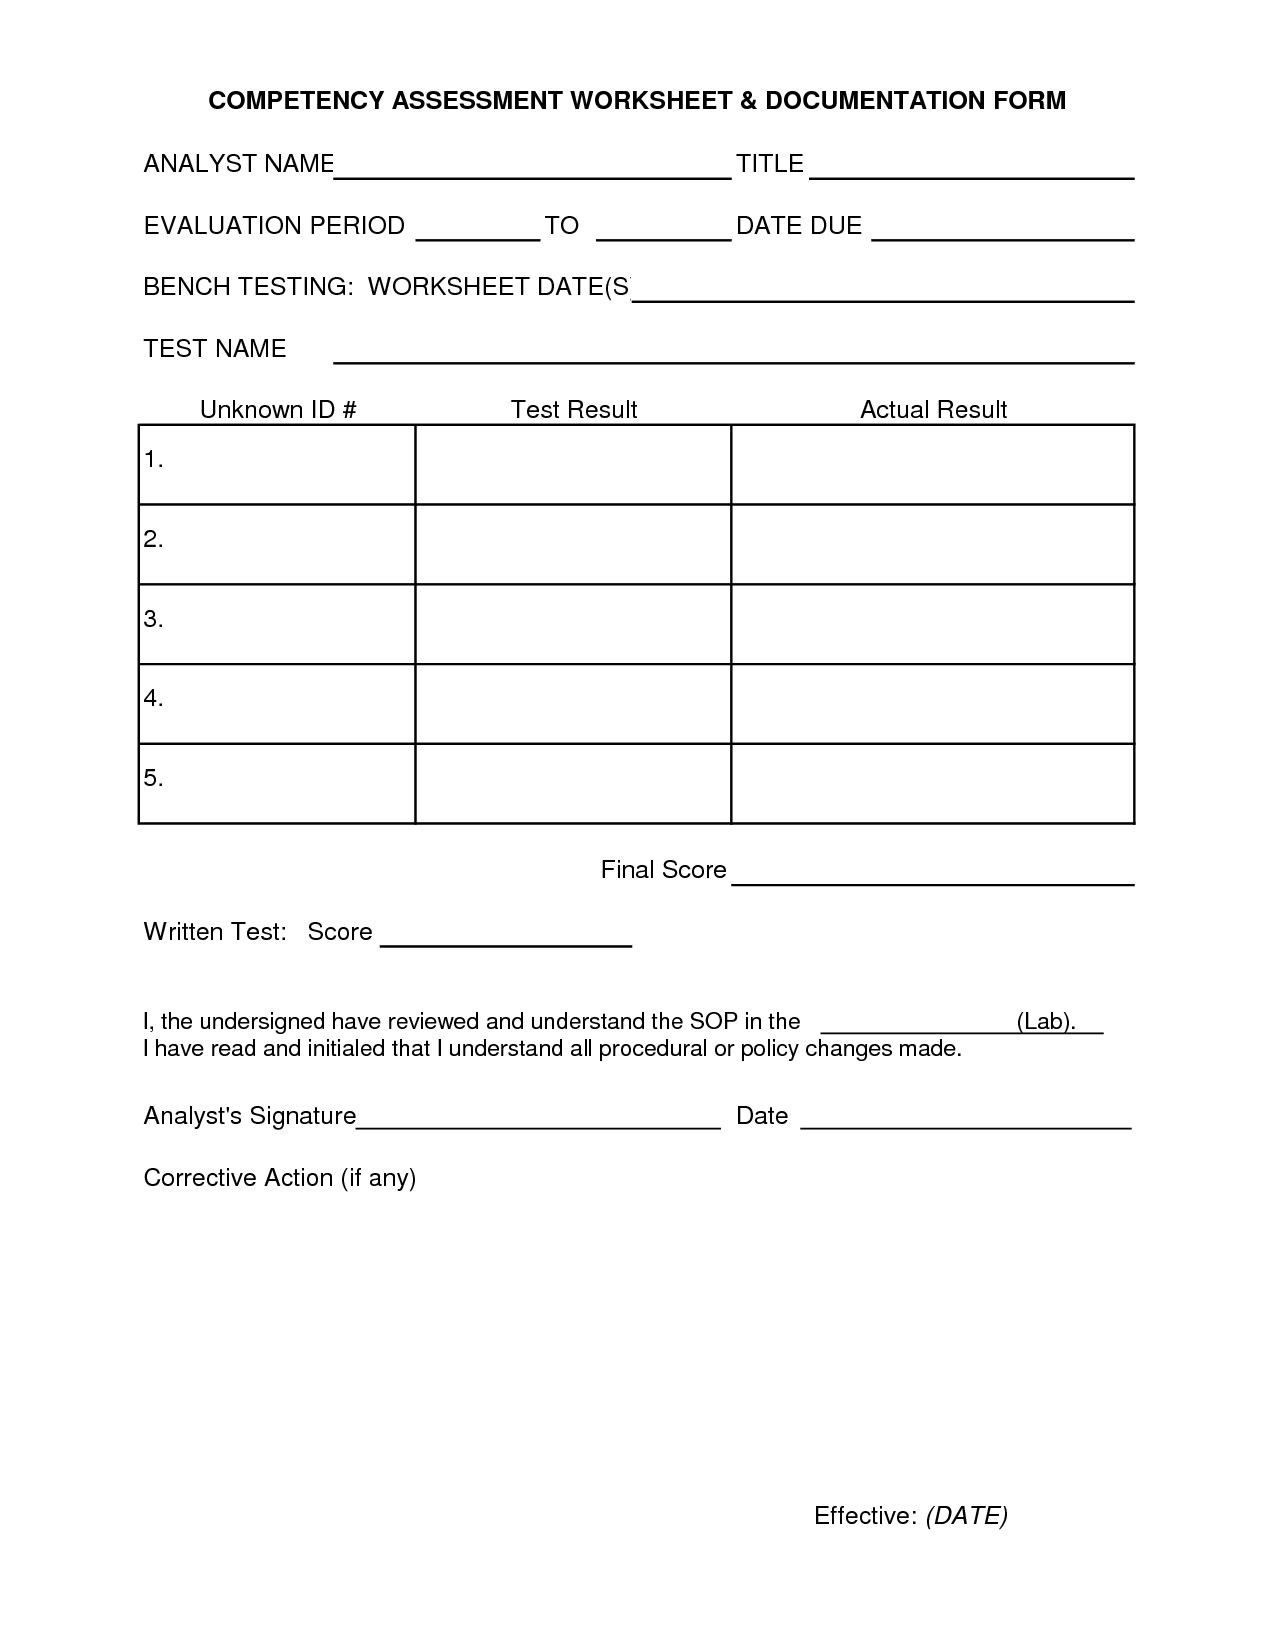 Competency Assessment Form Template Image